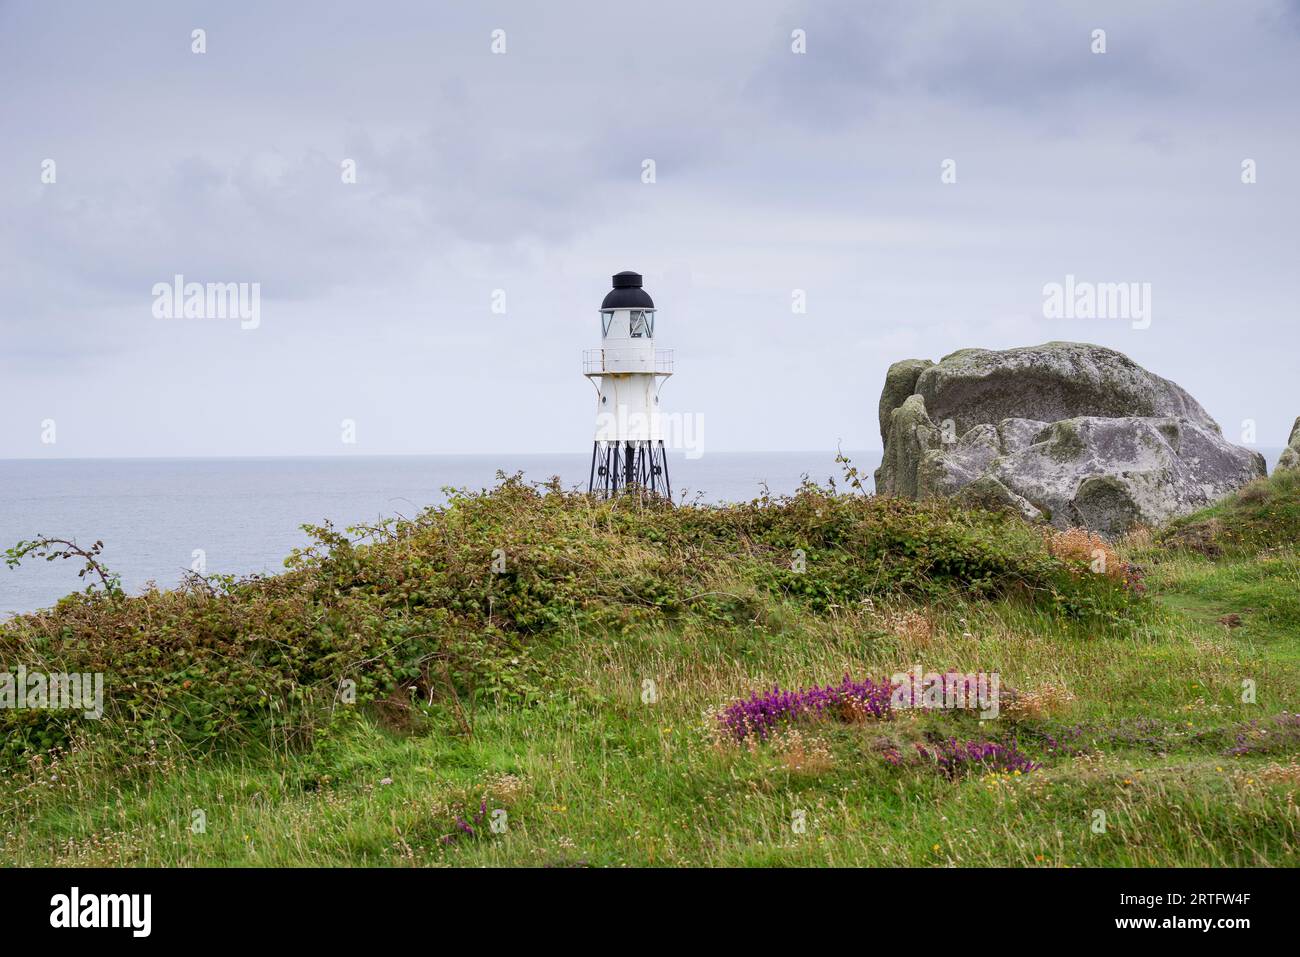 The picturesque Peninnis Head Lighthouse on St Marys island, Isles of Scilly Stock Photo